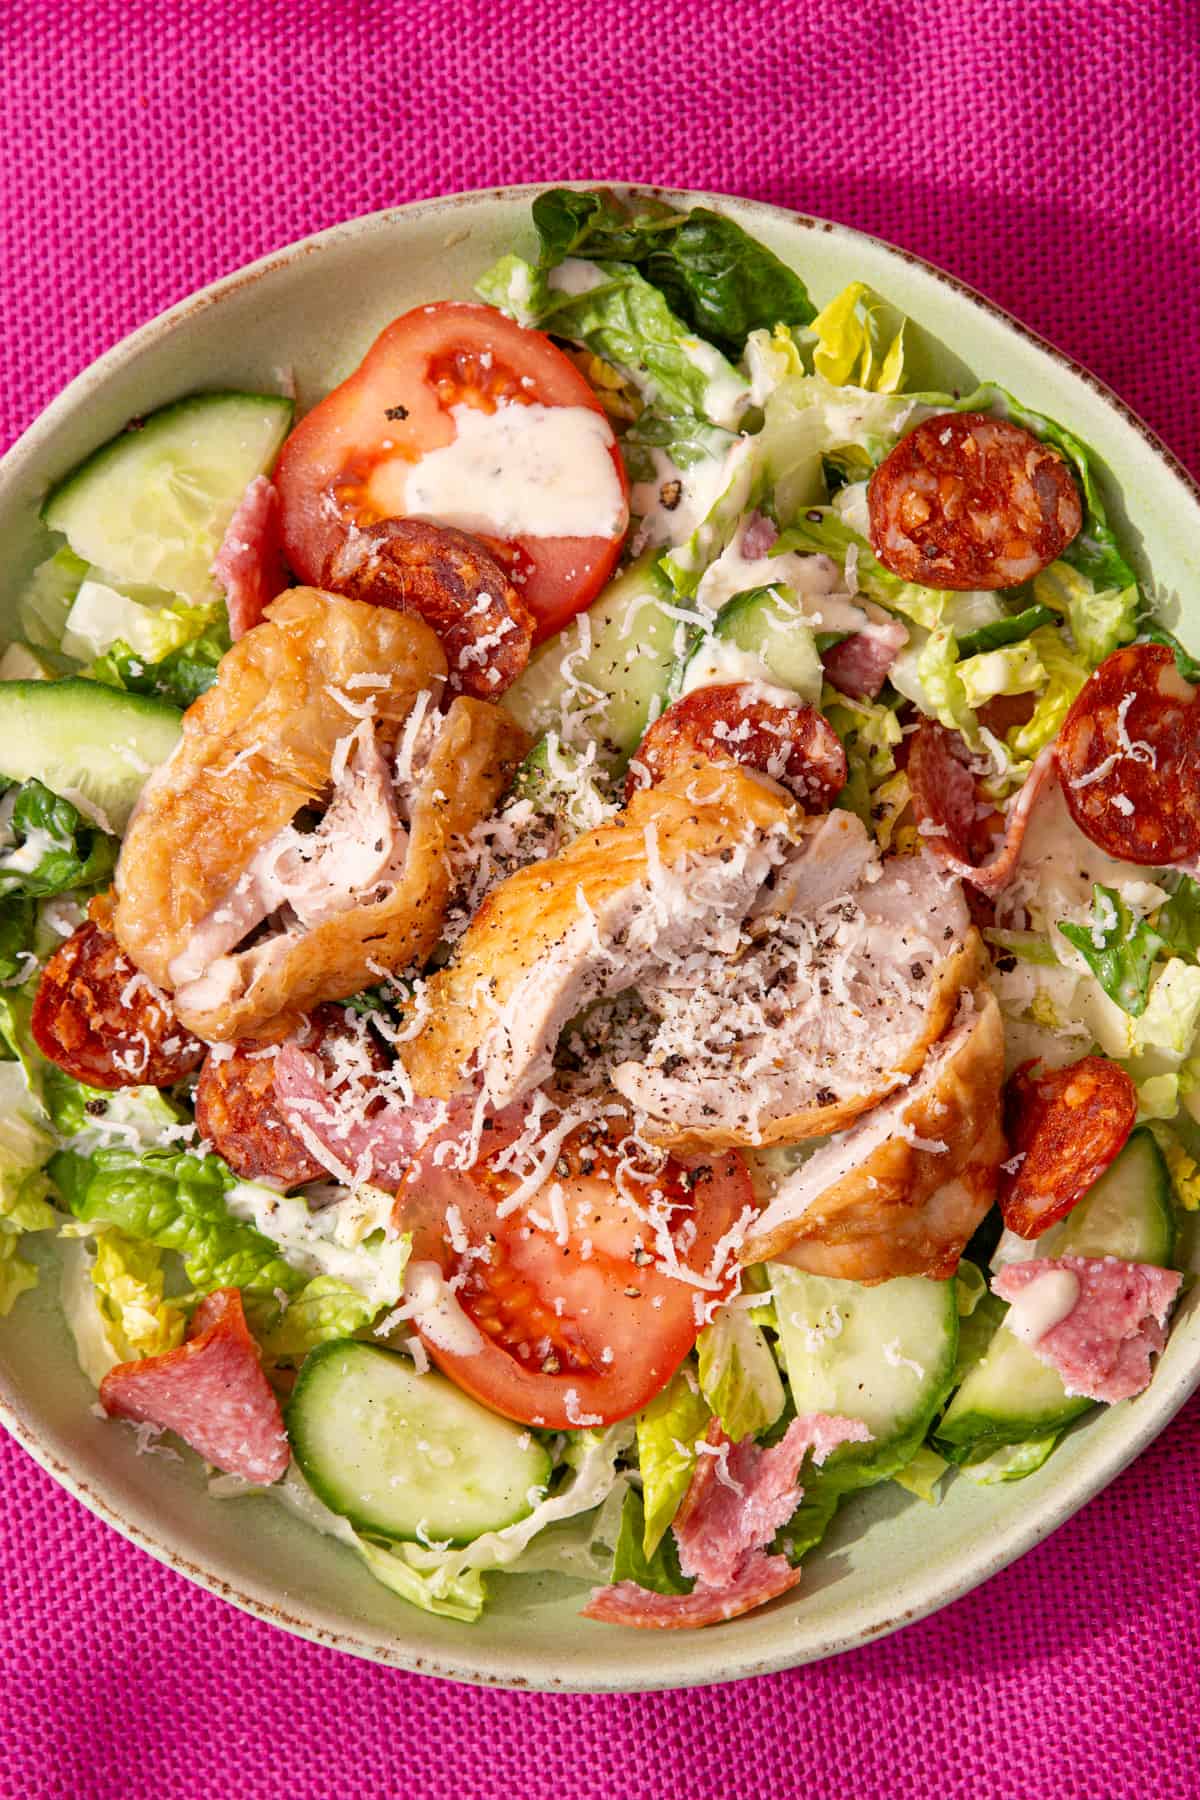 A bowl of salad with lettuce, tomatoes, cucumber, salami and chorizo pieces , chicken with skin slices and lots of parmesan shavings.